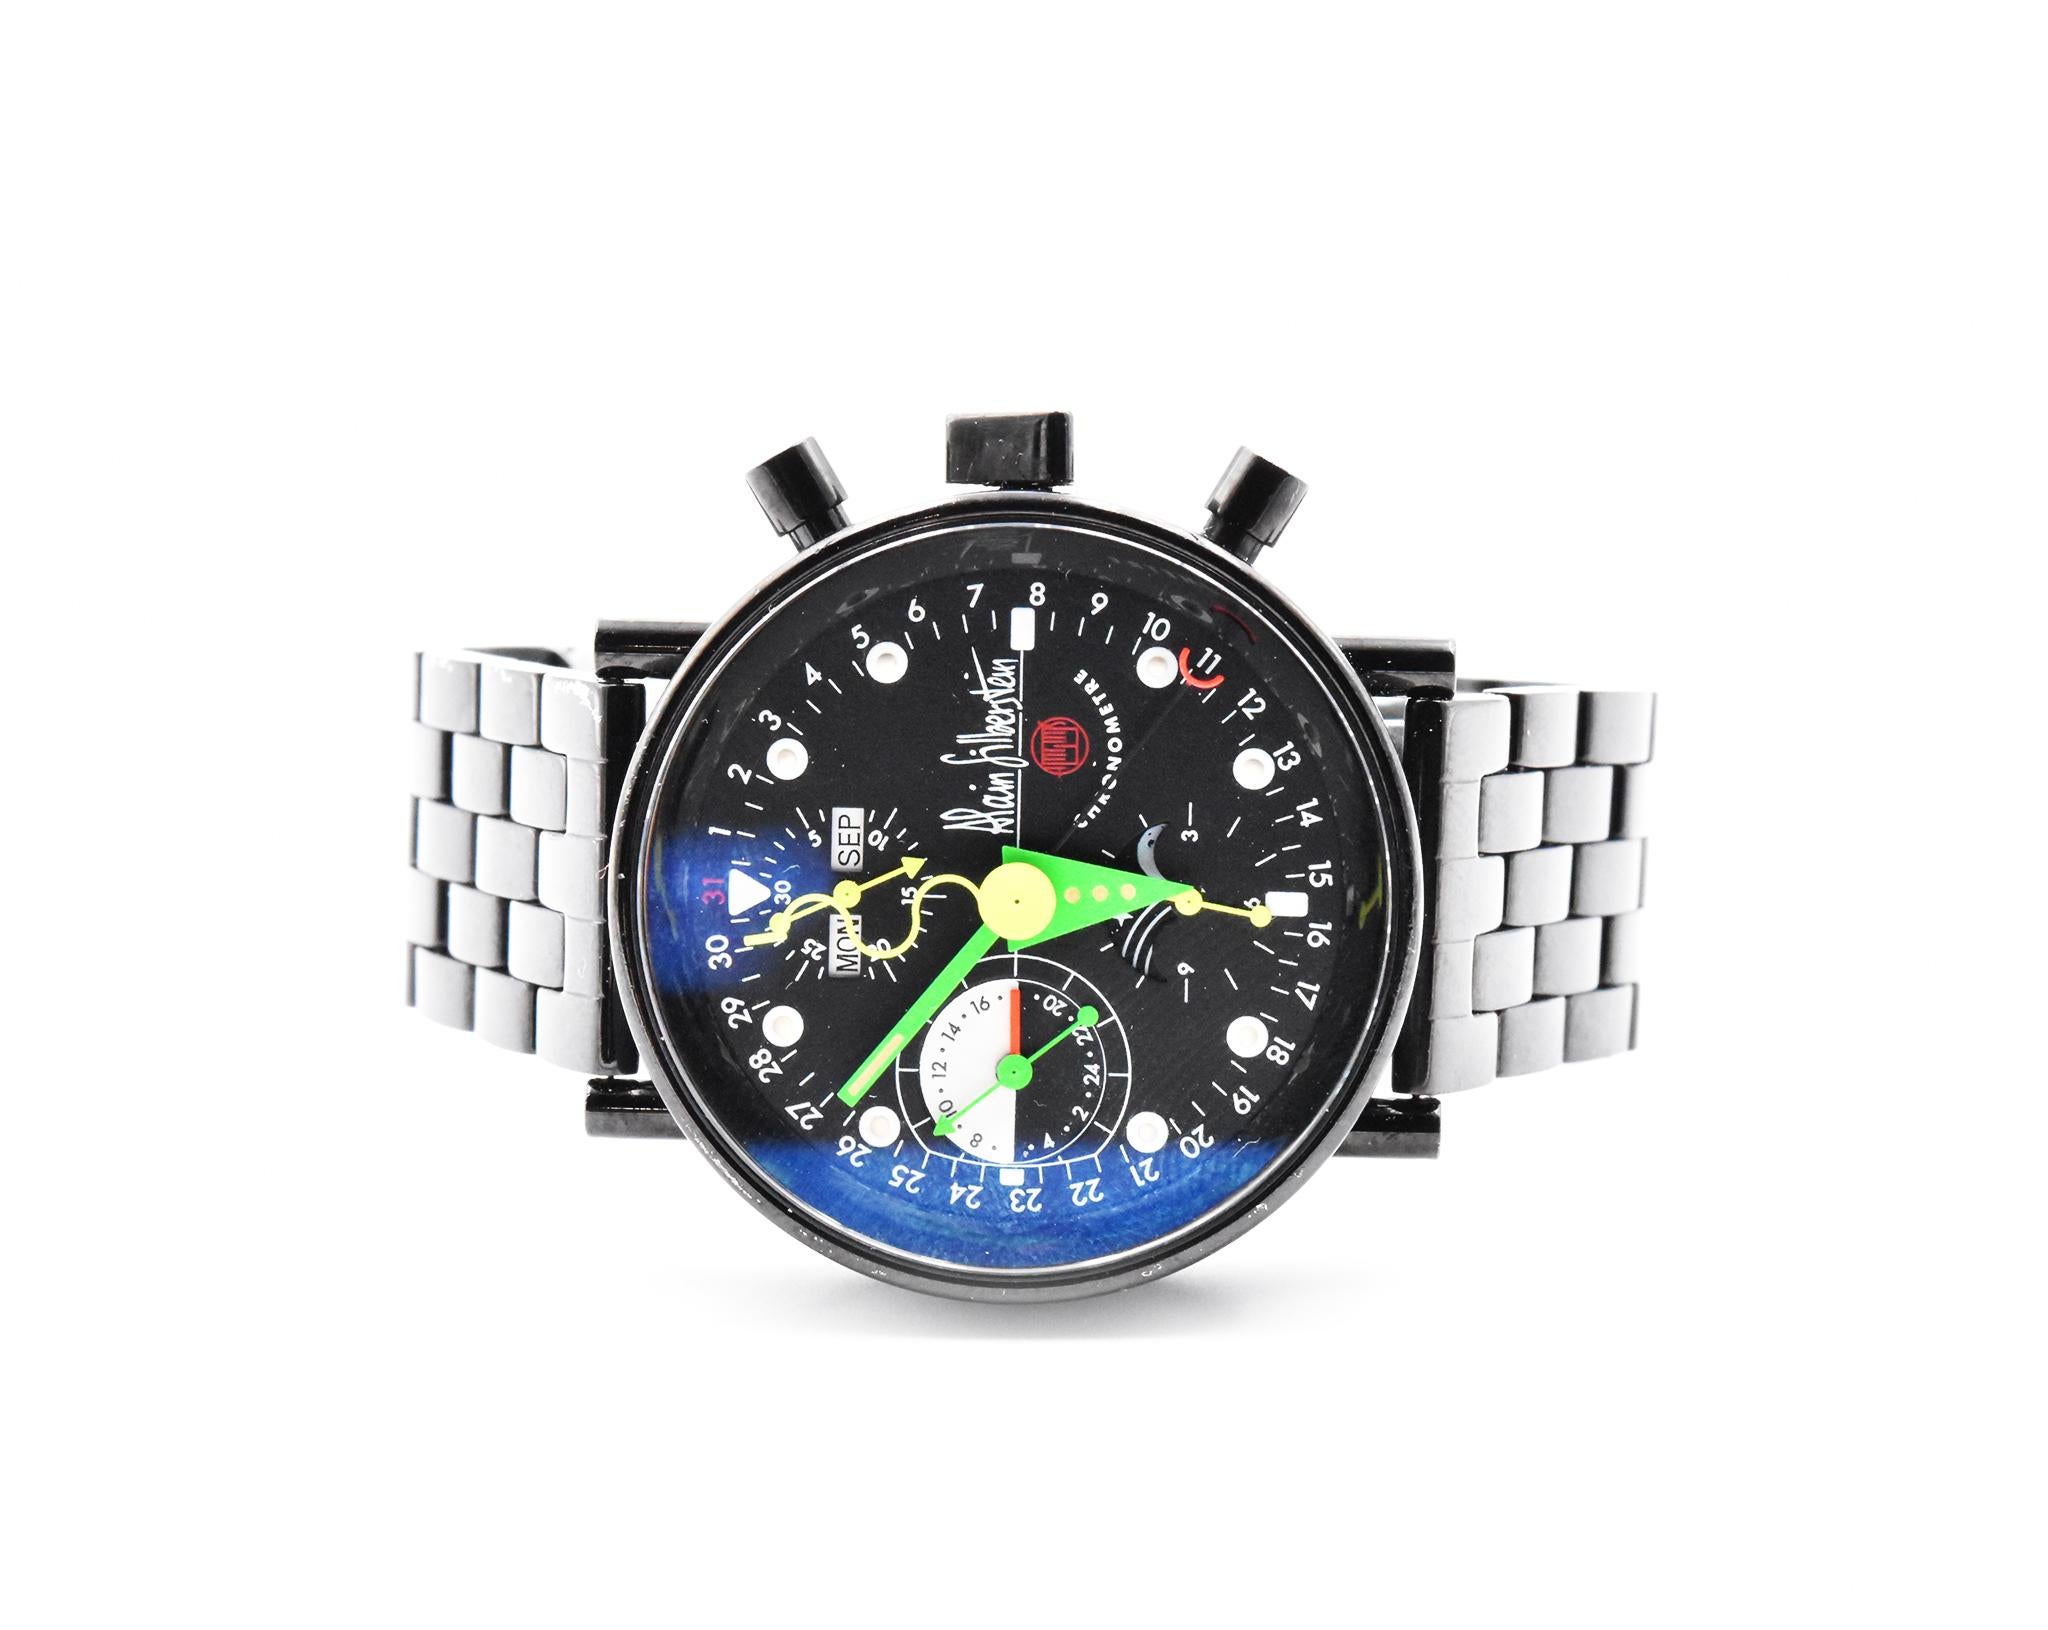 Movement: automatic
Function: hours, minutes, day-date-month, moon phase
Case: 40mm round black stainless steel
Dial: black with three sub dials are at 12, 6 and 9 o'clock for the chrono feature also the watch has day-date feature and the moon